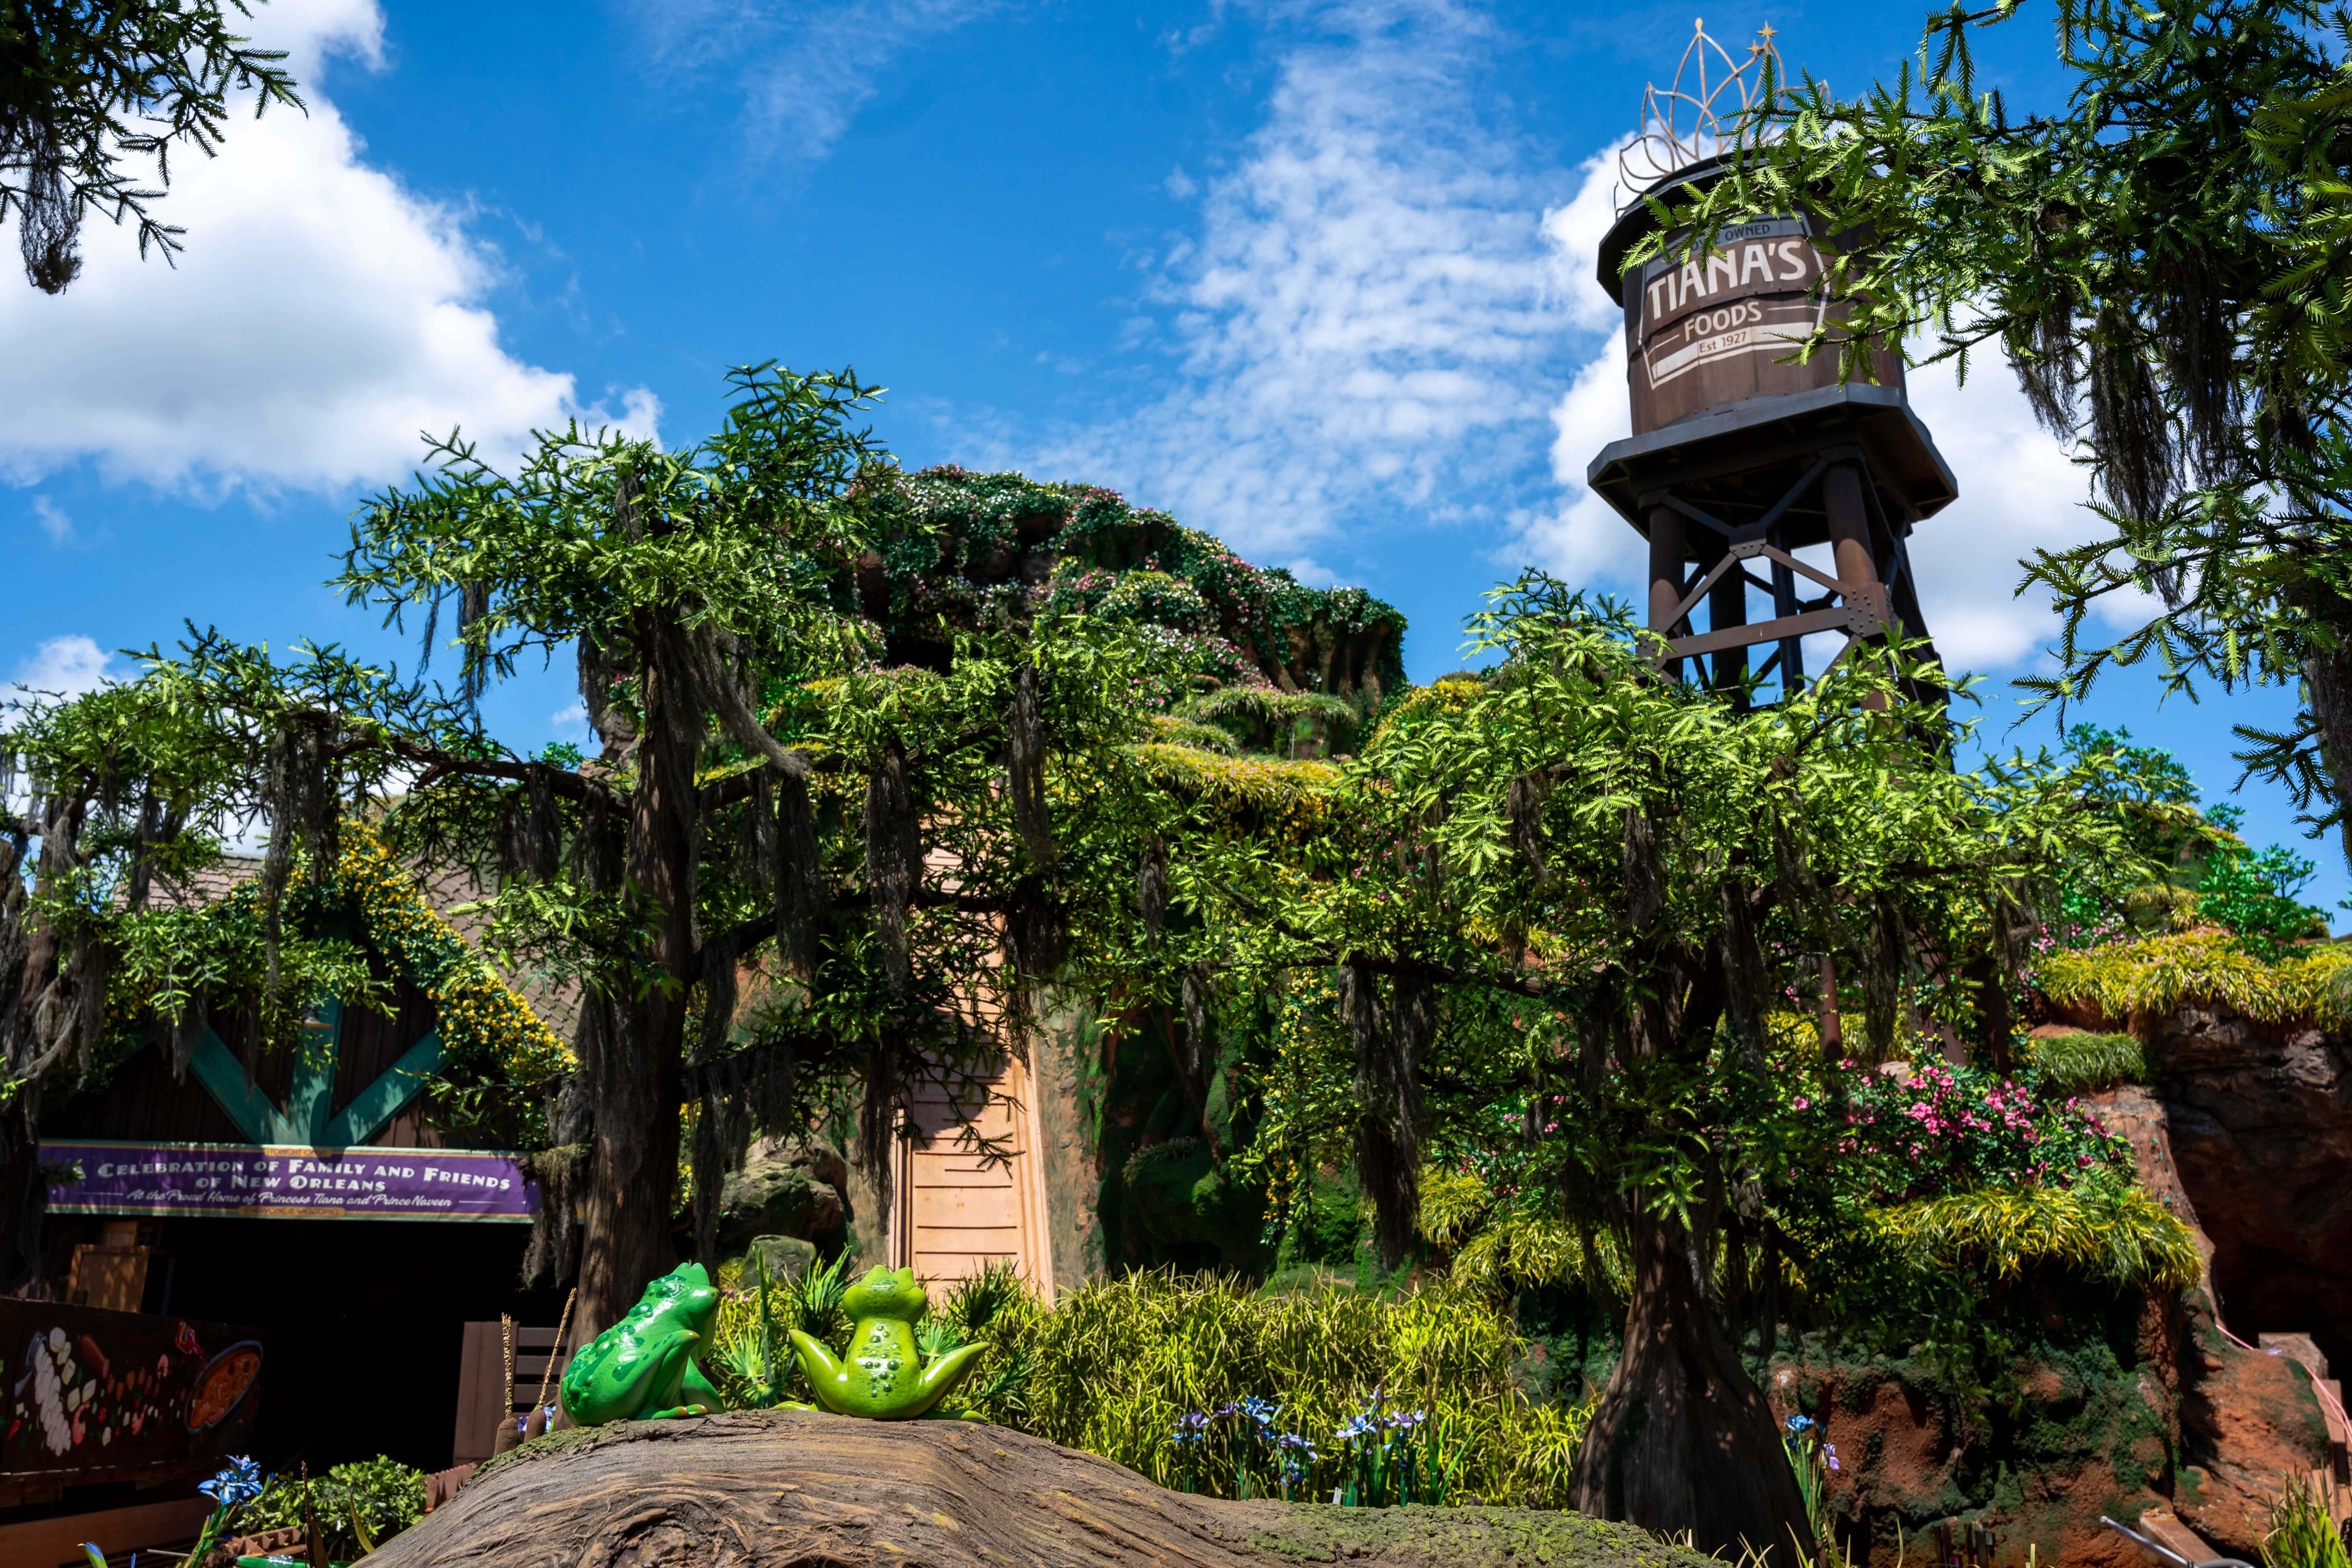 Walt Disney World&#x27;s Splash Mountain re-themed as Tiana&#x27;s Bayou Adventure. The ride&#x27;s exterior features lush greenery and a water tower labeled &quot;Tiana’s Foods.&quot;